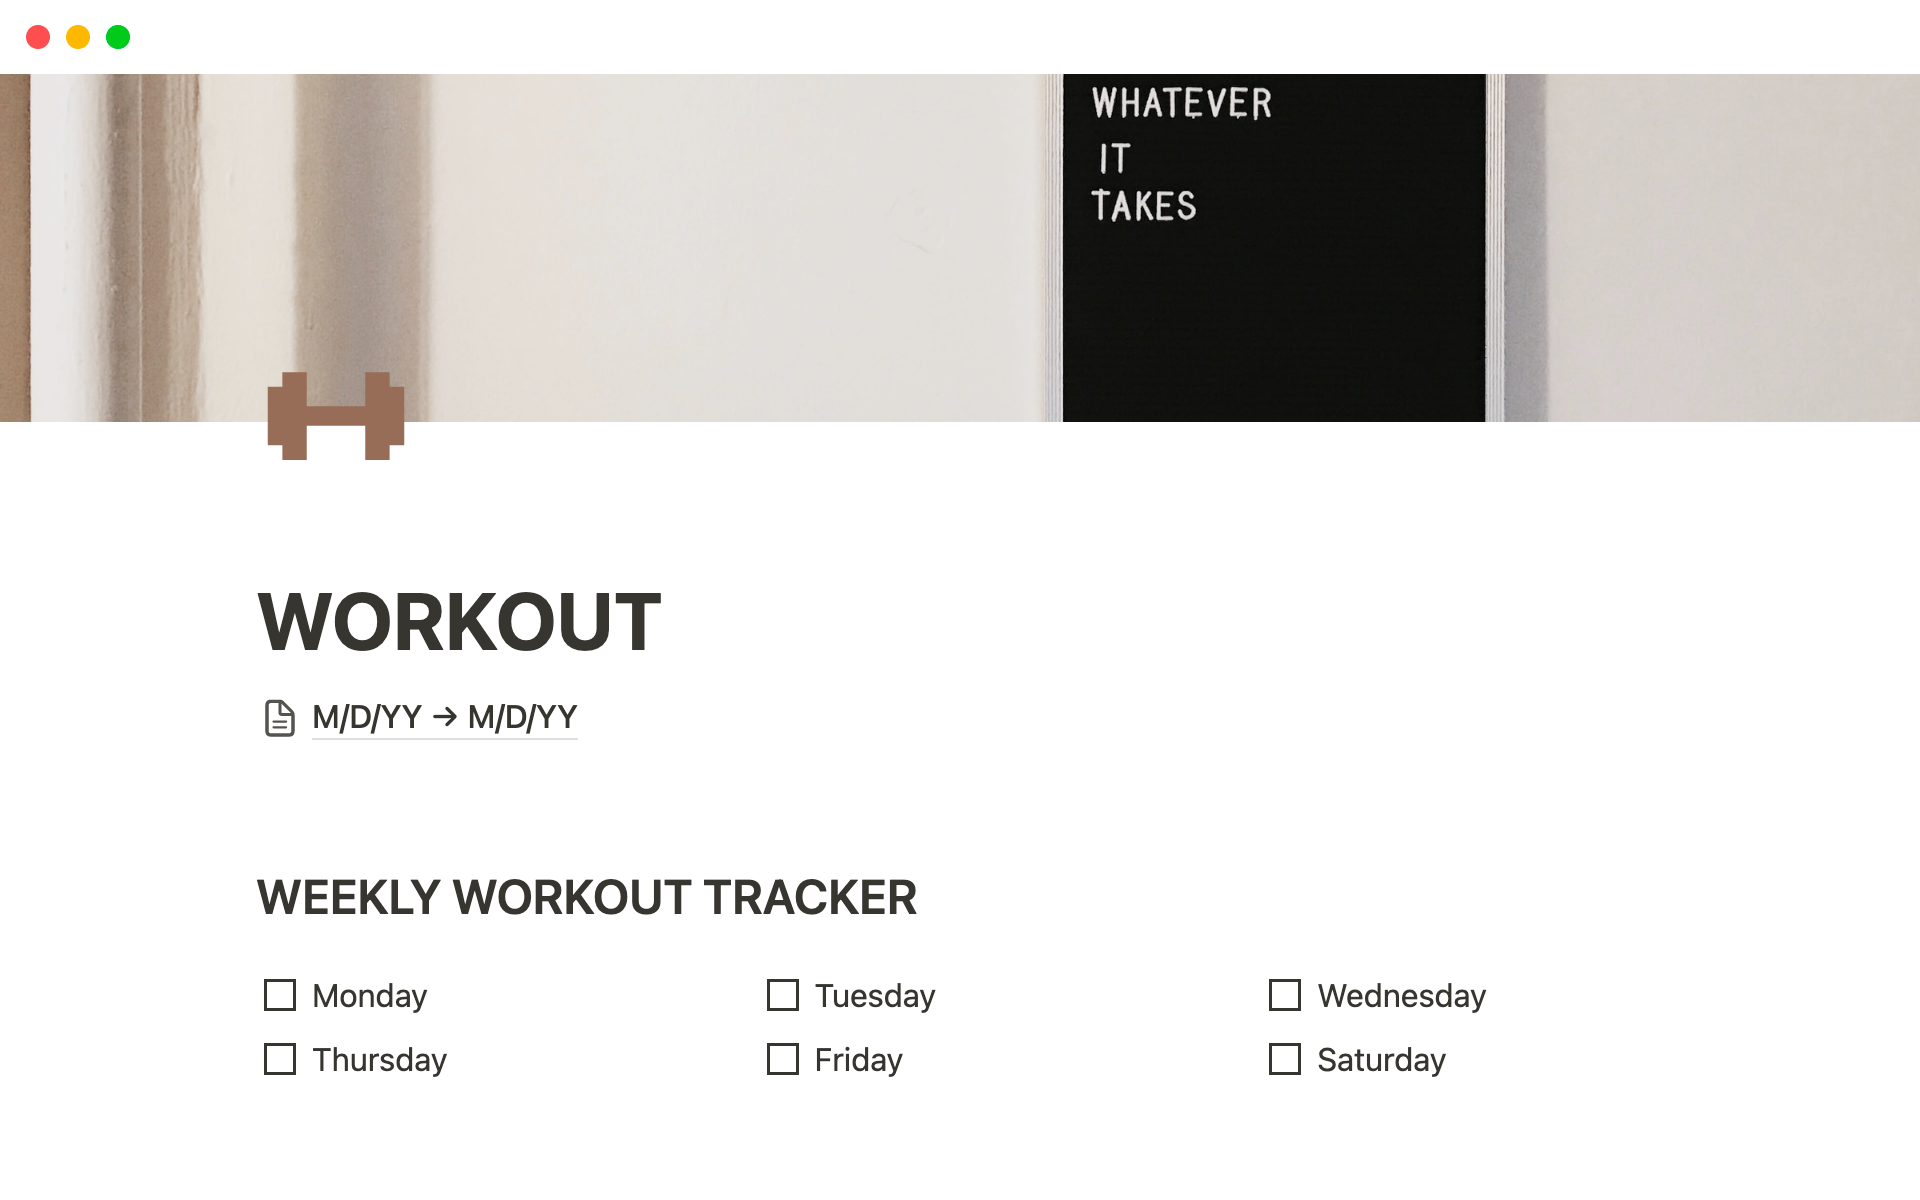 Provides a space to track workouts for better growth.